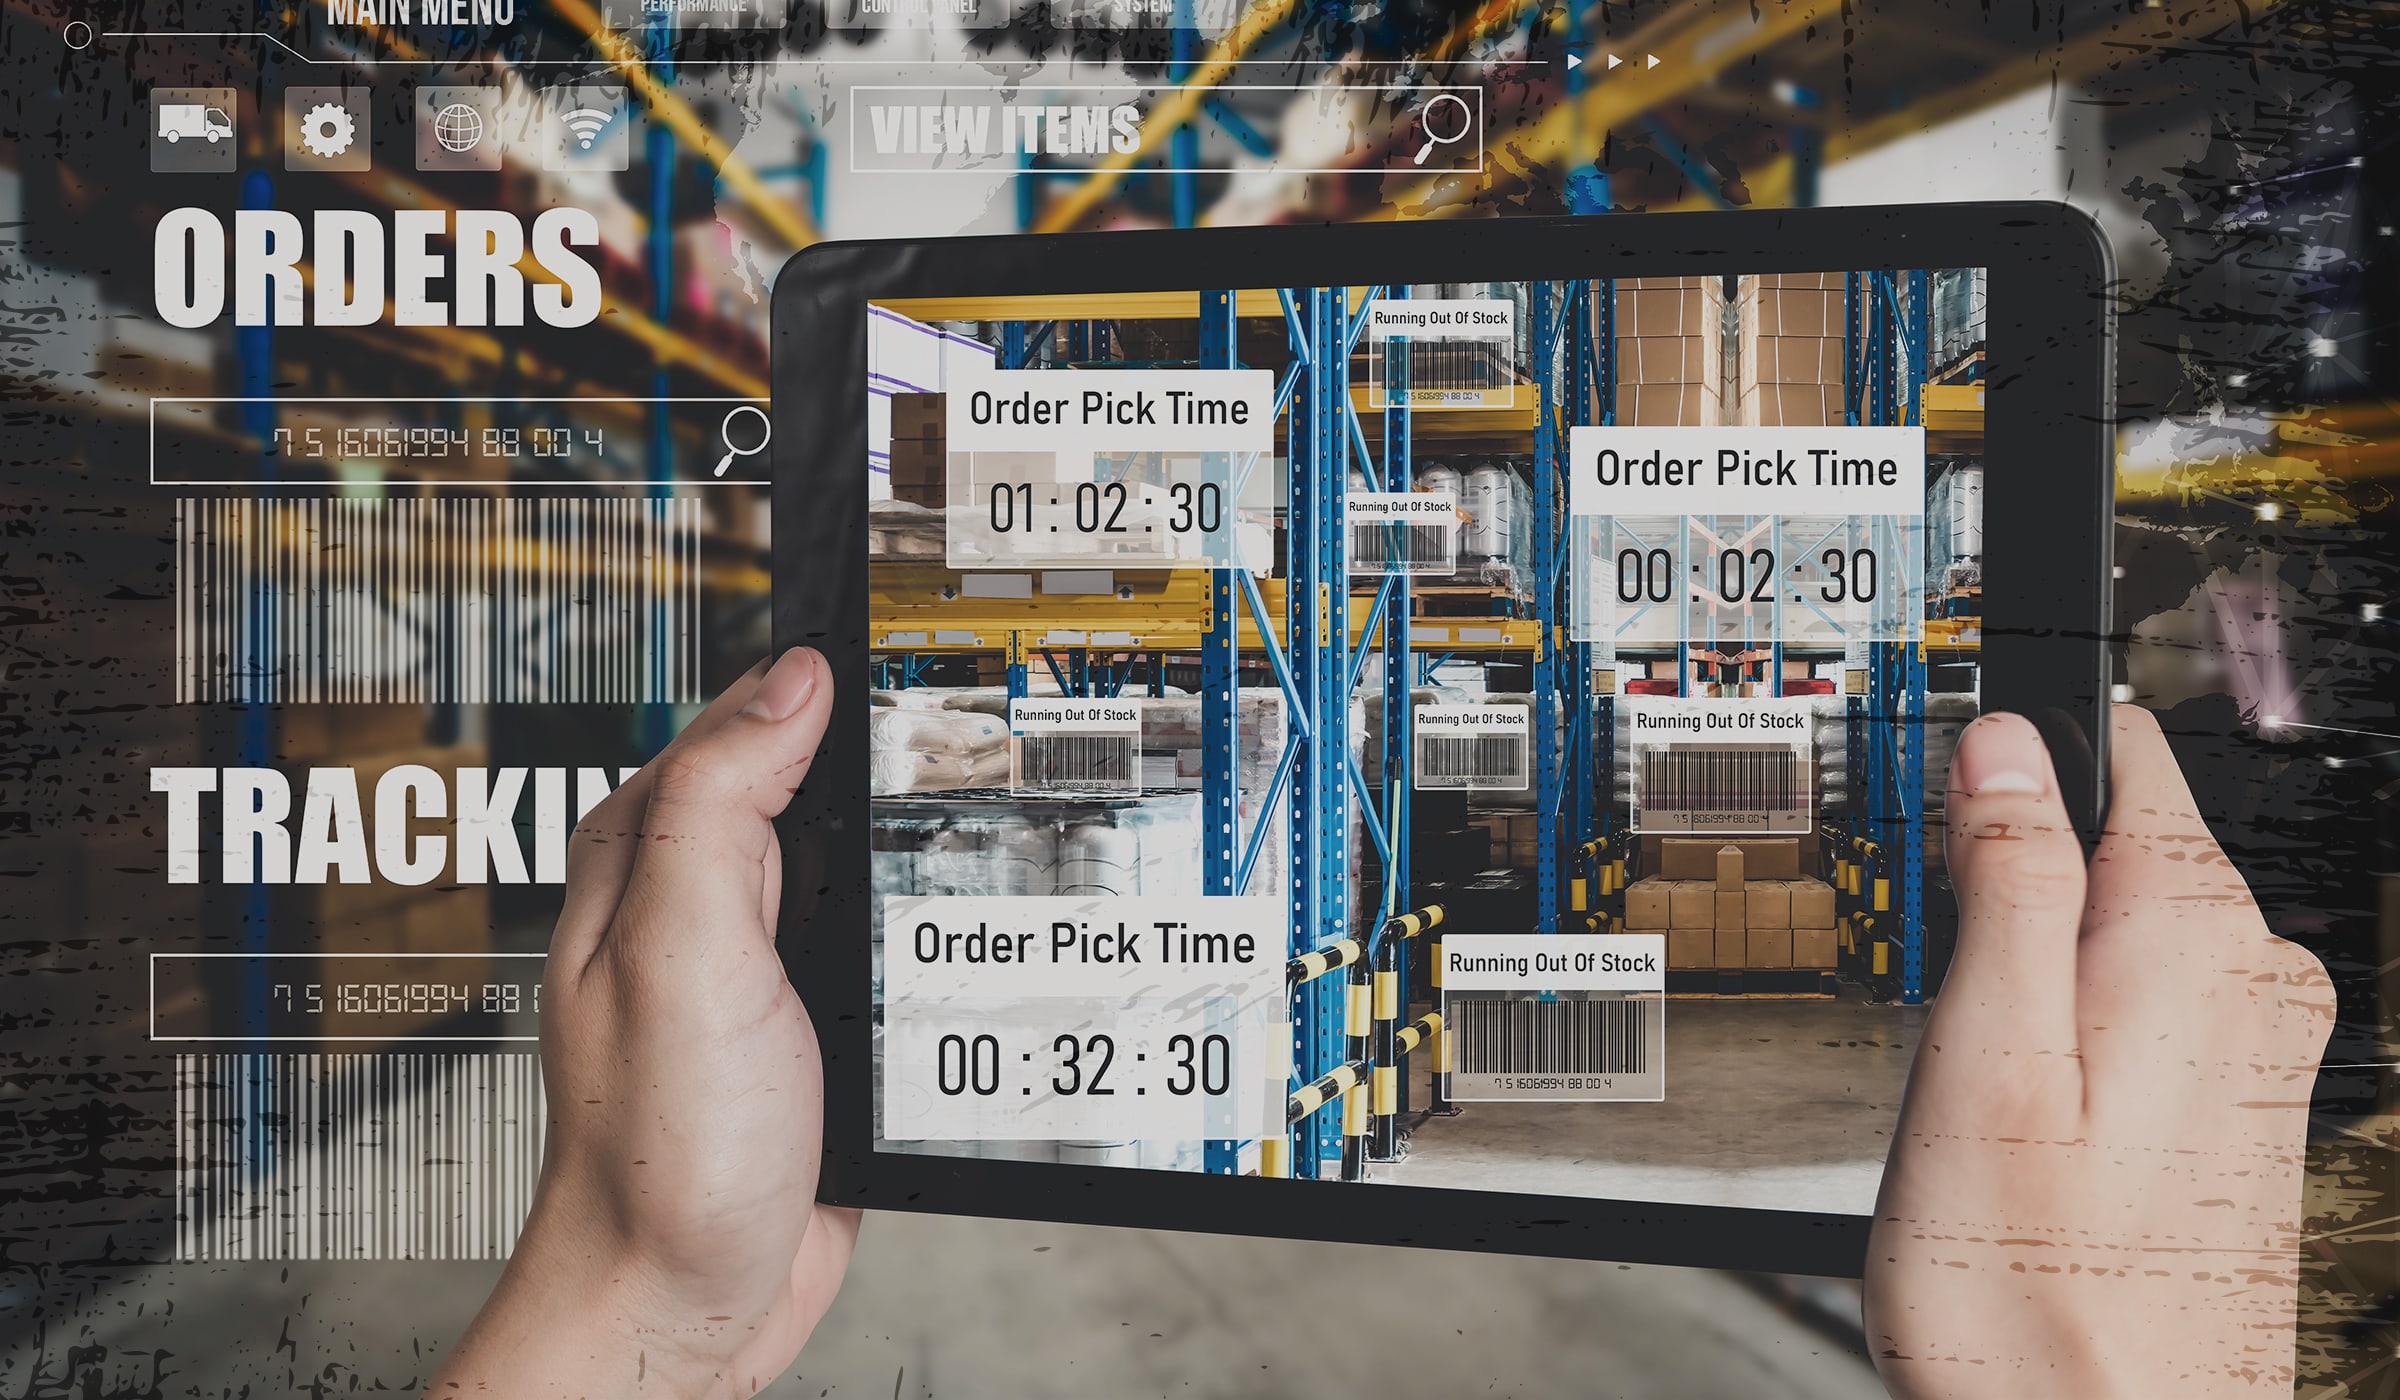 iPad scanning warehouse with order picking and tracking